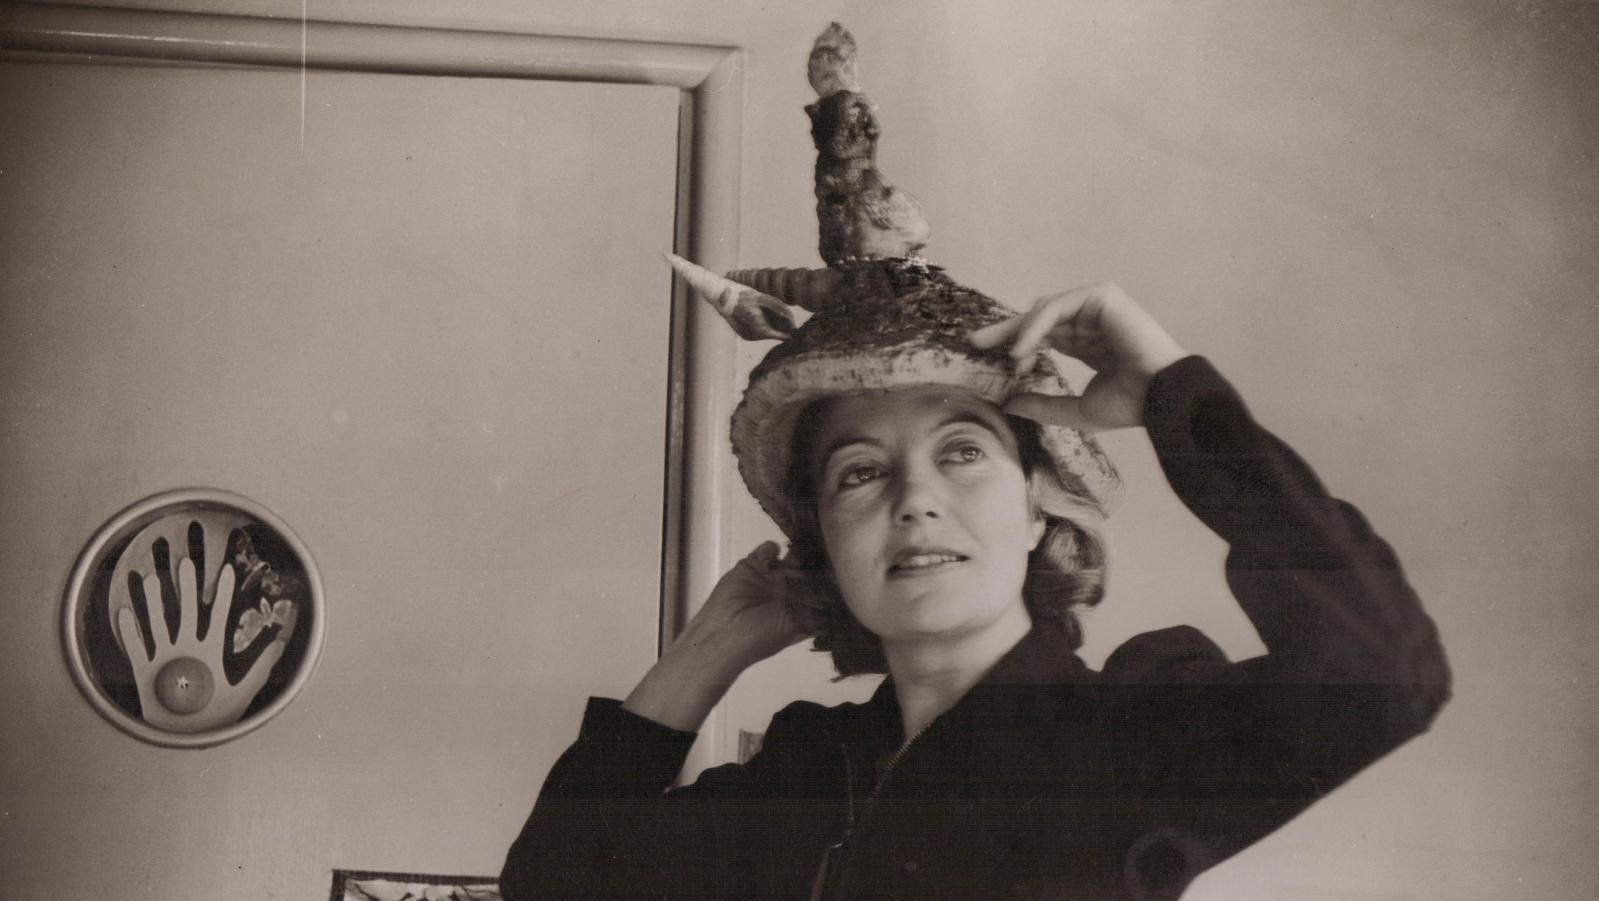 Photograph of Agar wearing Ceremonial Hat for Eating Bouillabaisse, 1936, PhotographPrivate... “Eileen Agar: Angel of Anarchy”